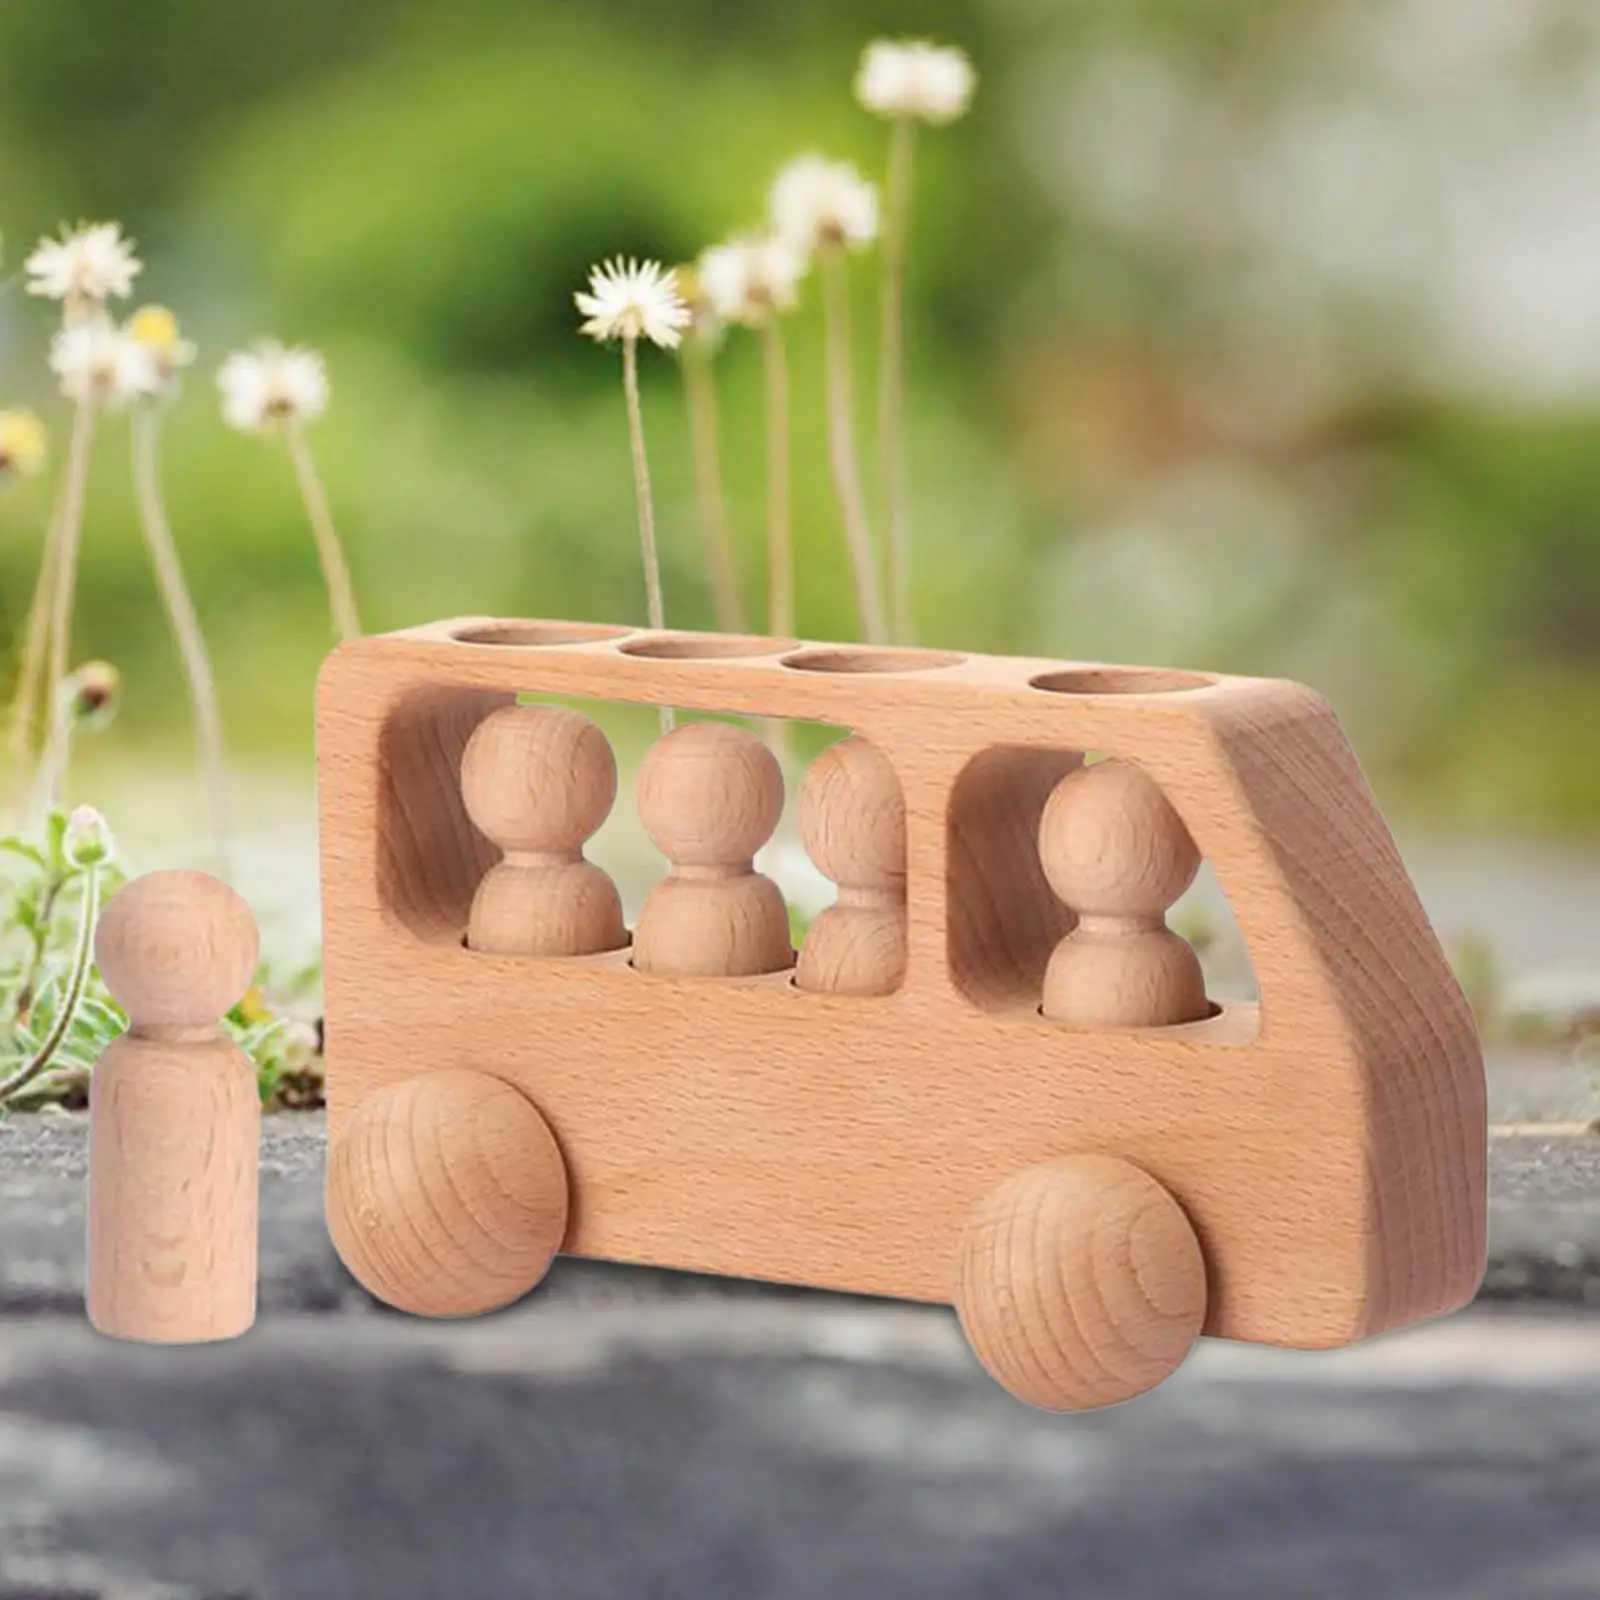 Wooden Bus Toy Car Blocks Preschool Learning Activities for Kids Gift